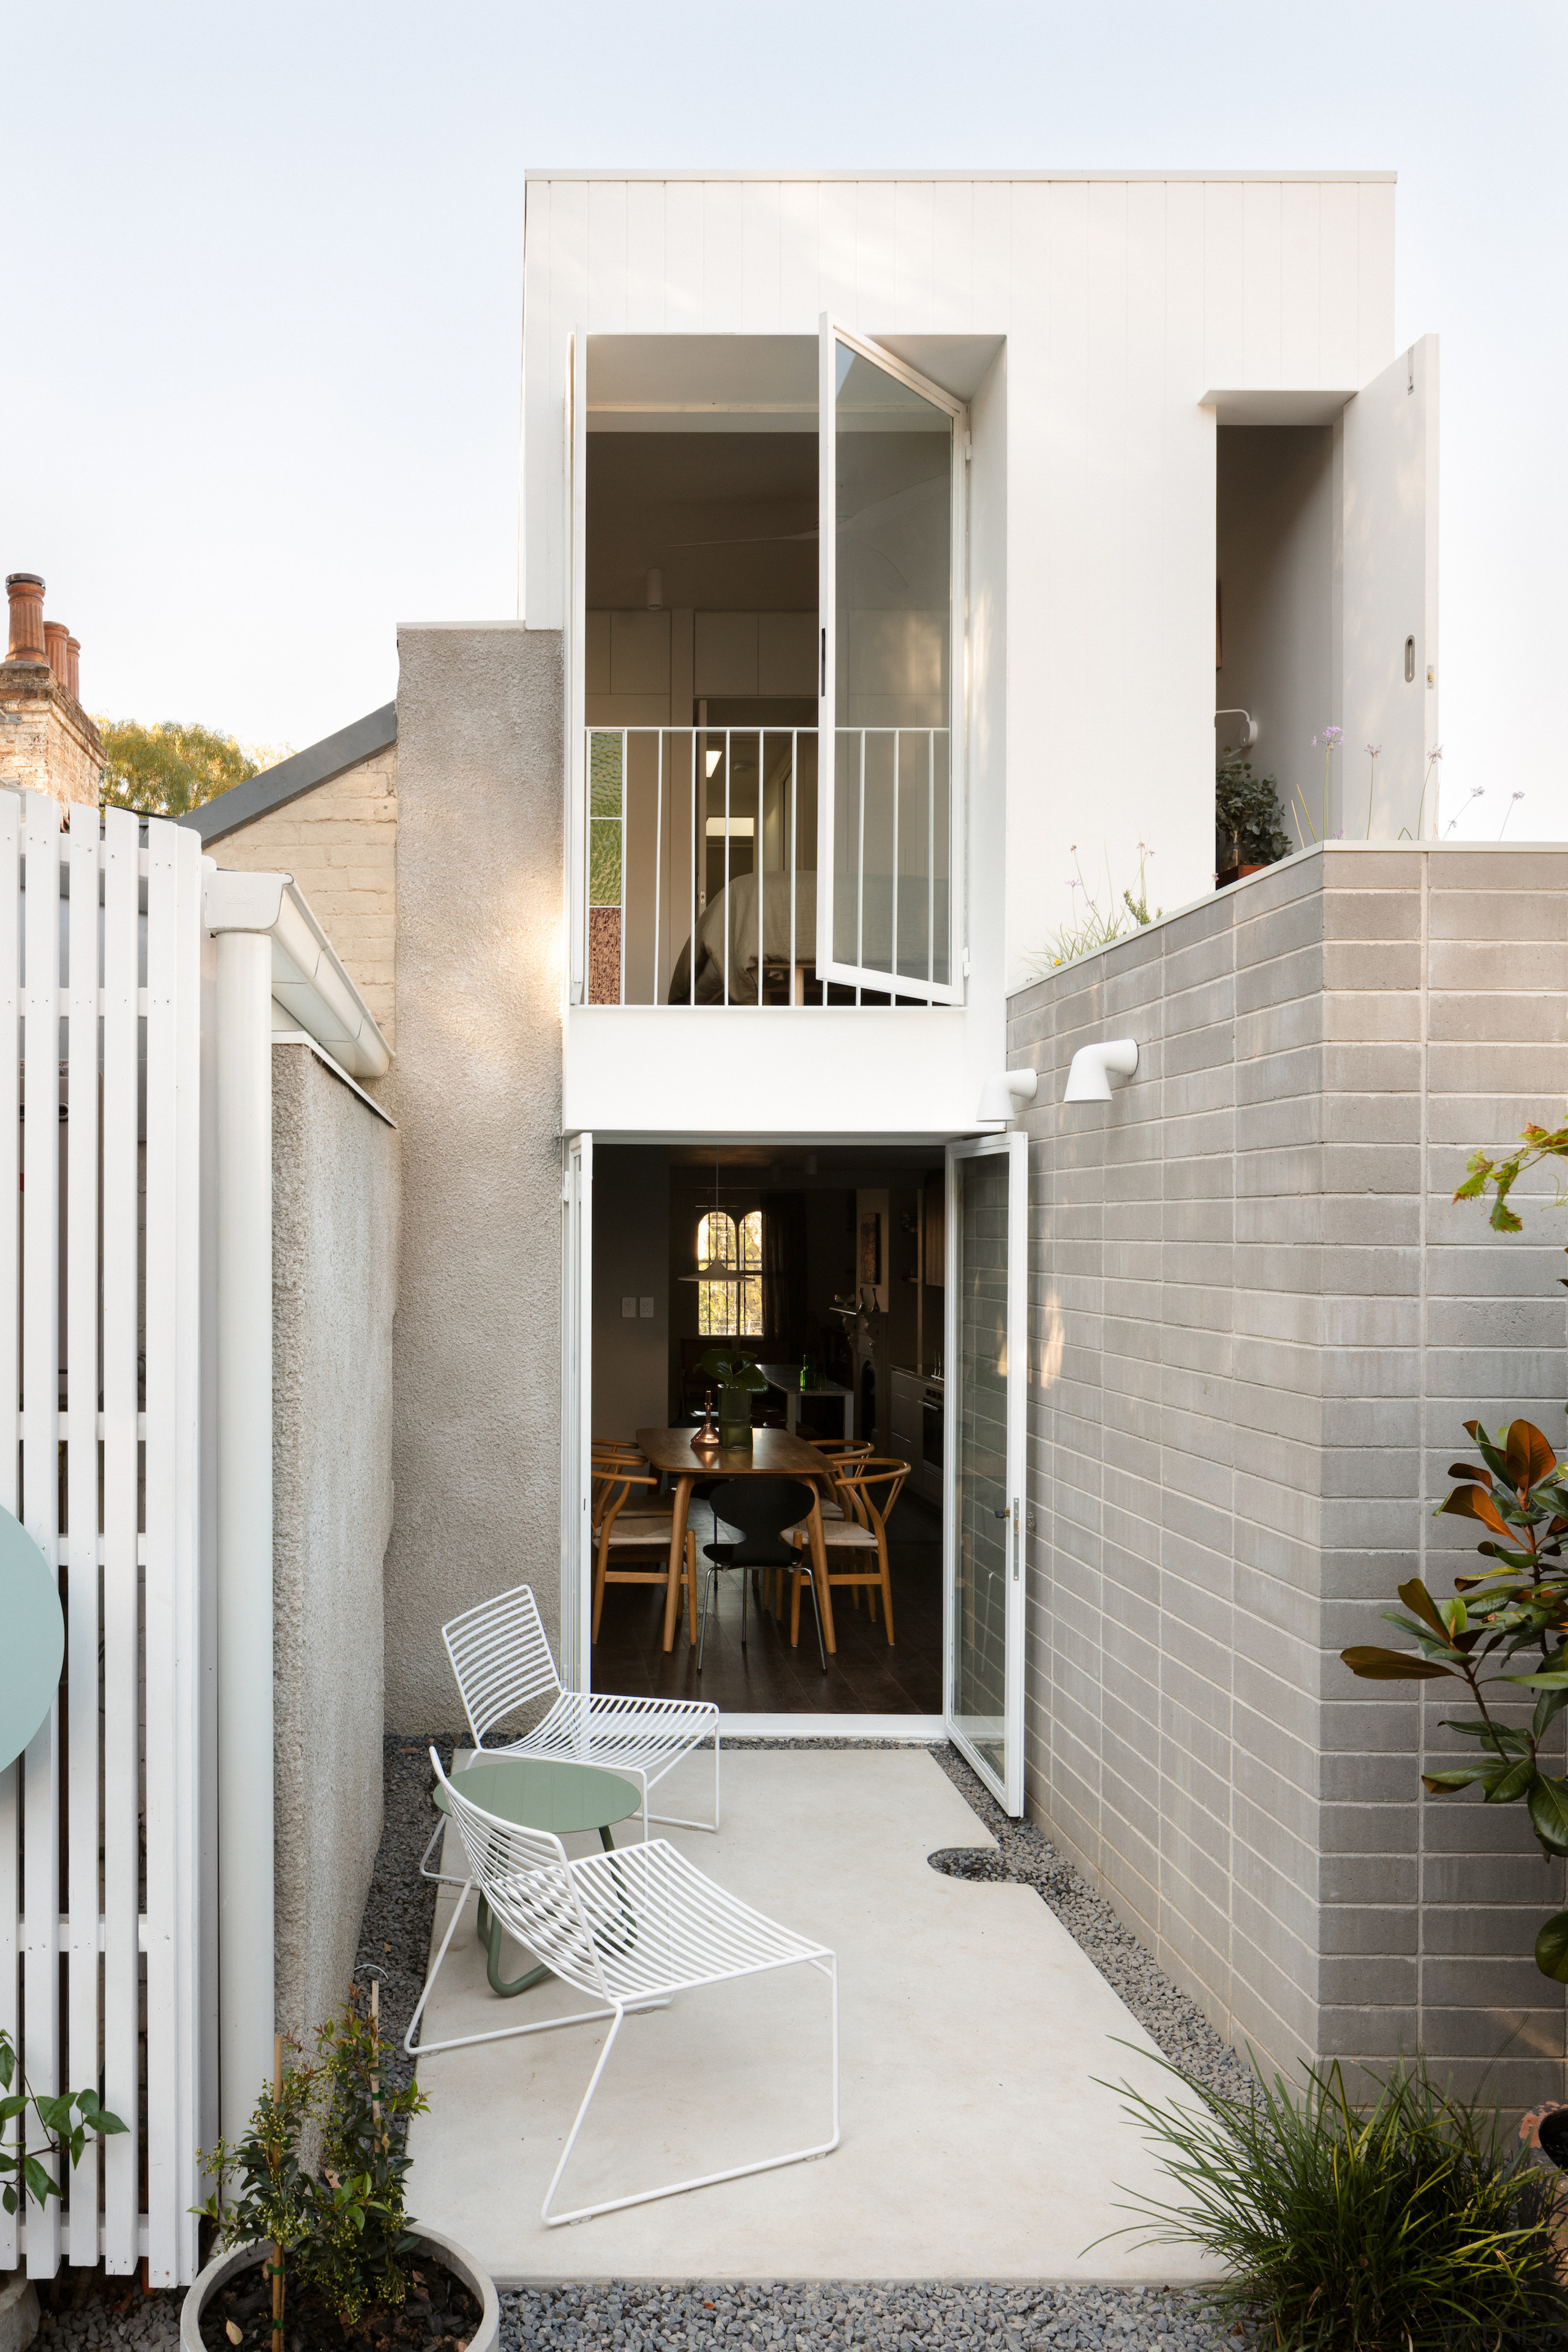 Open sesame – the rear rethink/extension has transformed 